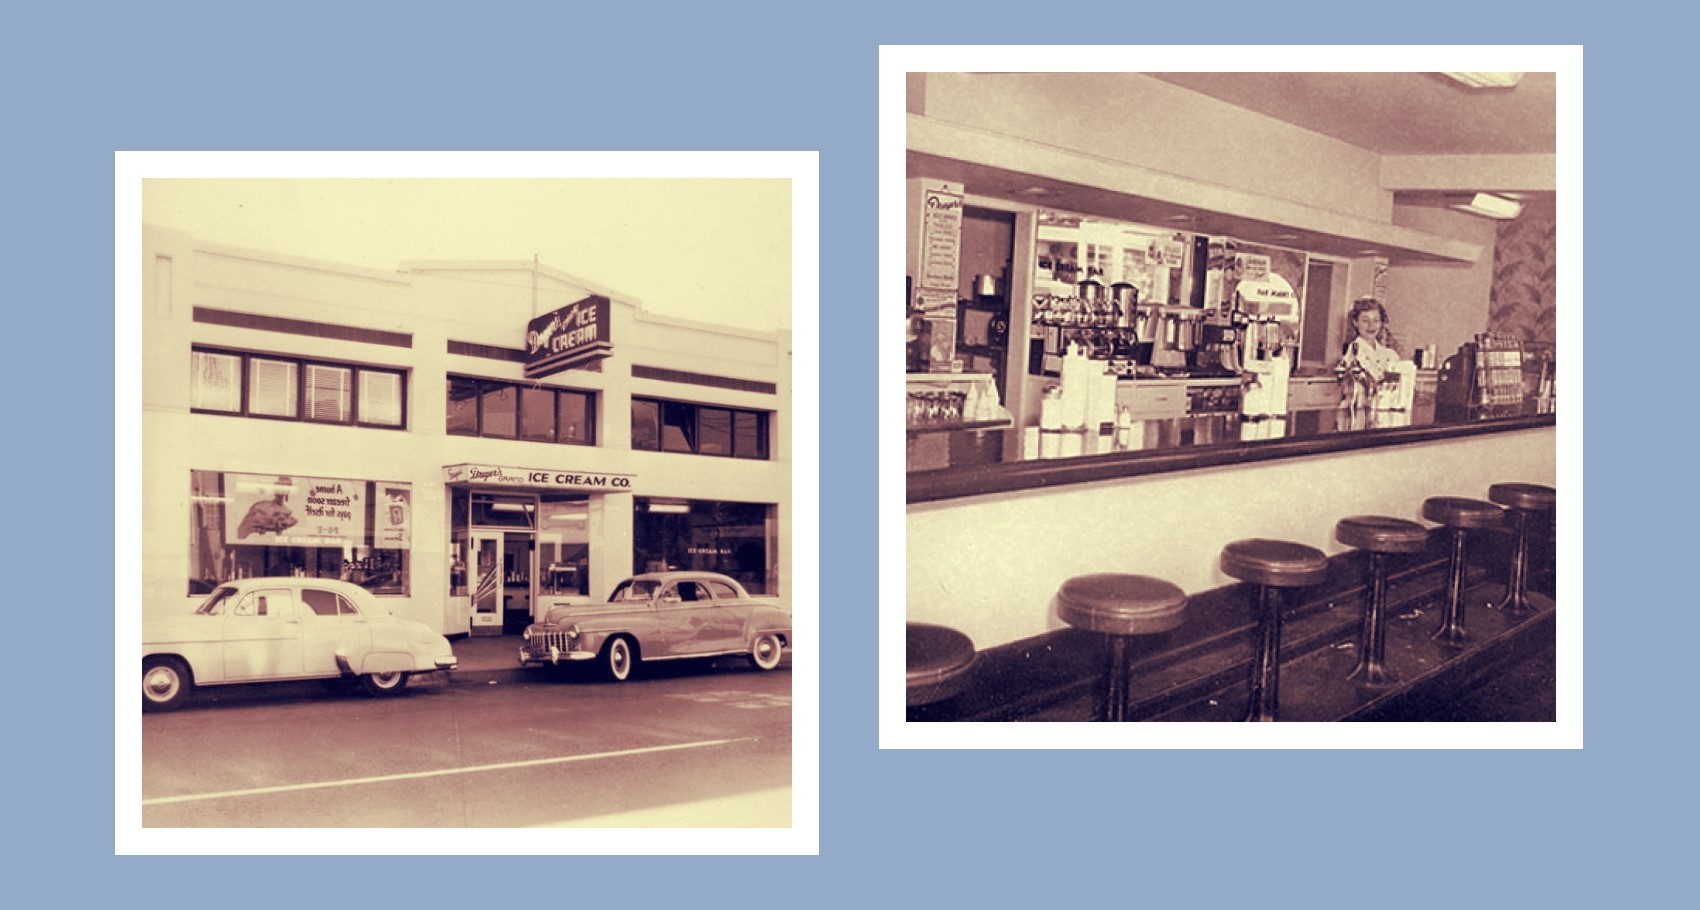 Old photos of Dreyer's ice cream shop and inside of the shop counter